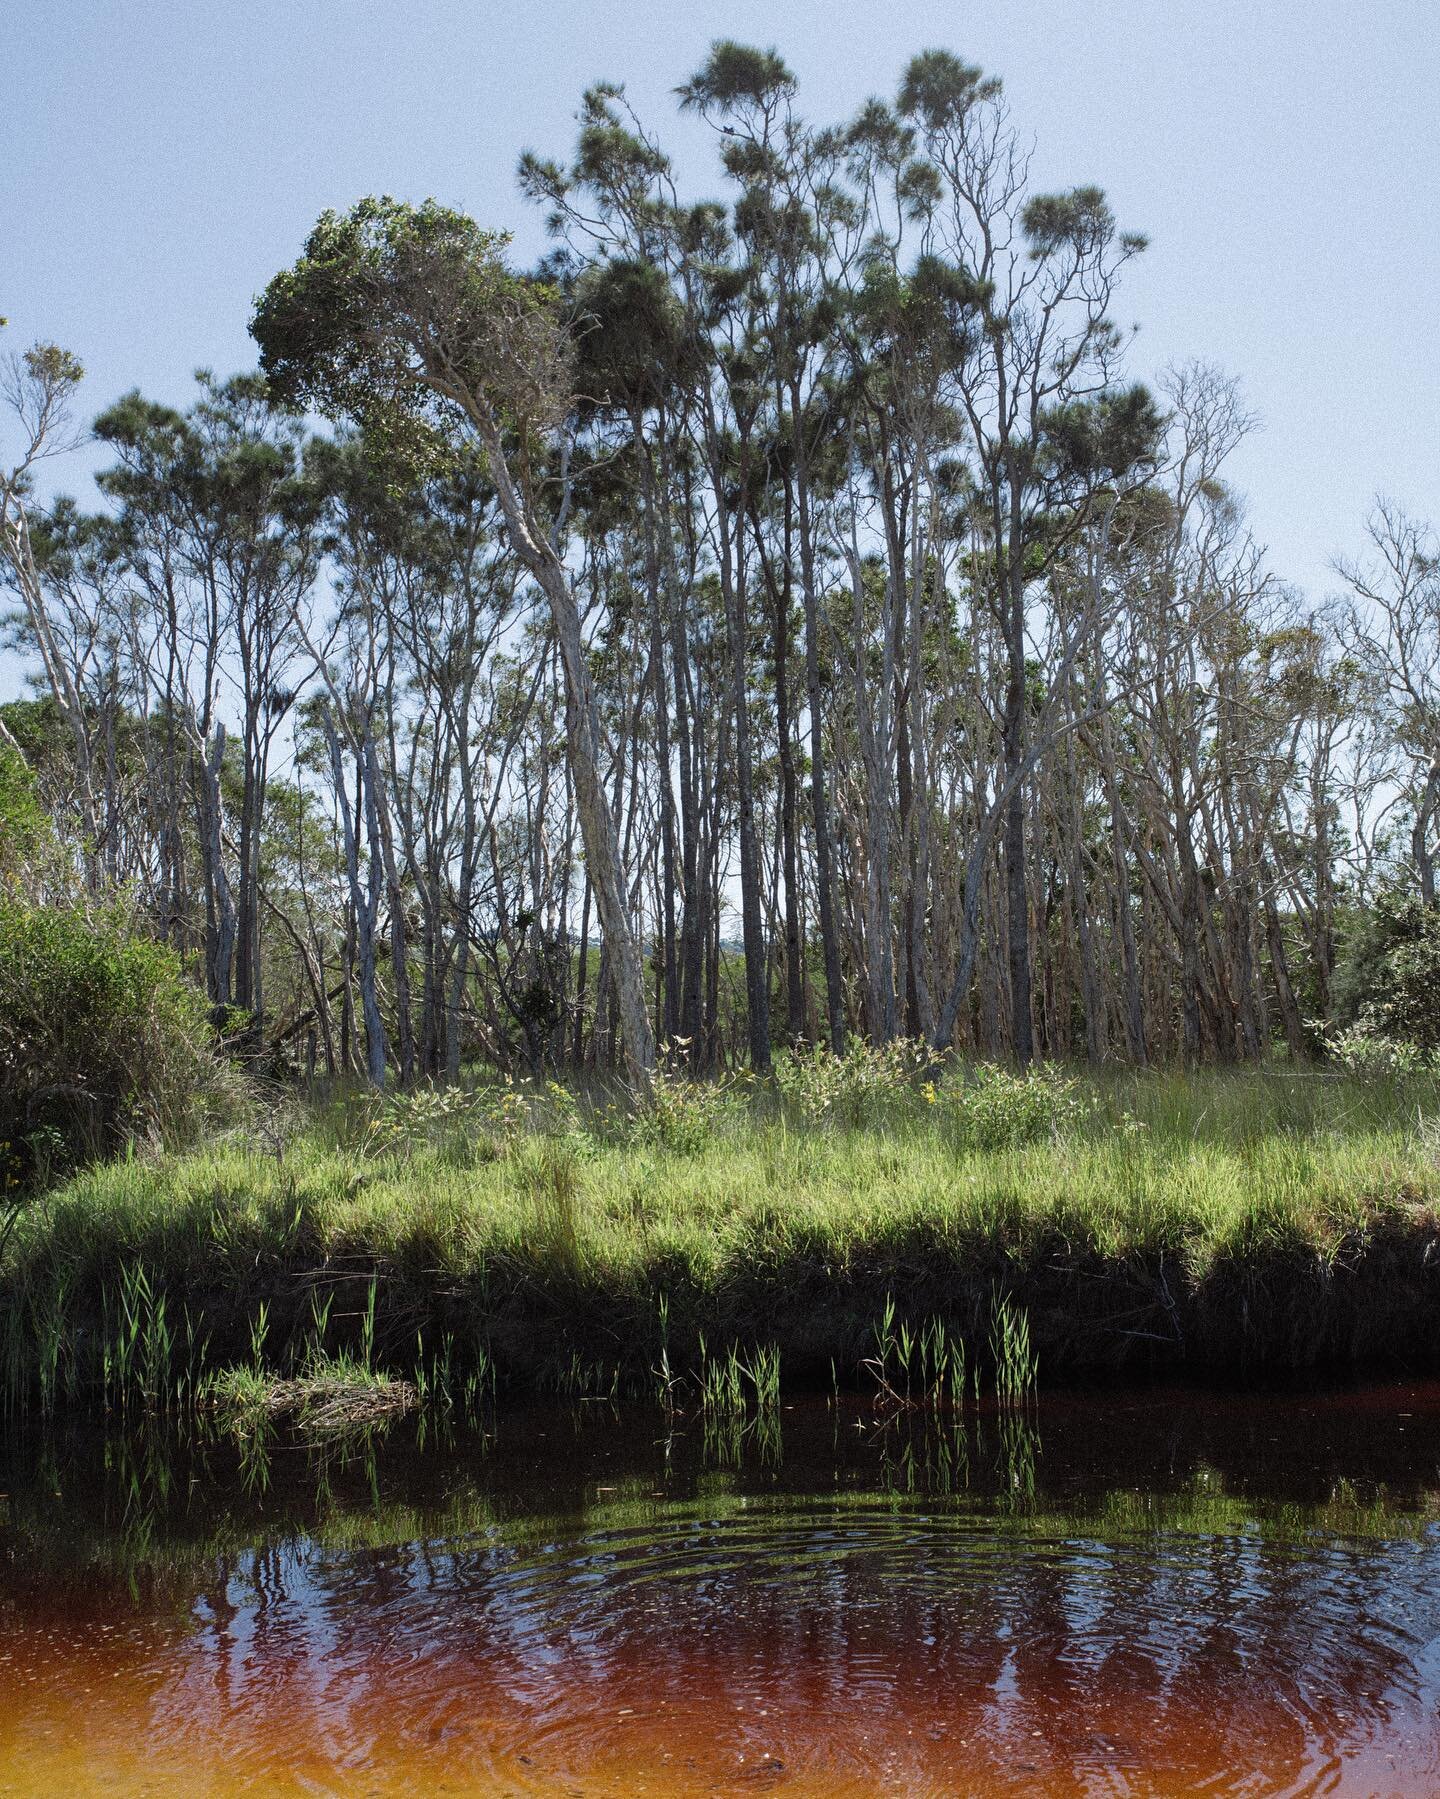 Healing waters of a tea tree lake in Northern New South Wales, Australia